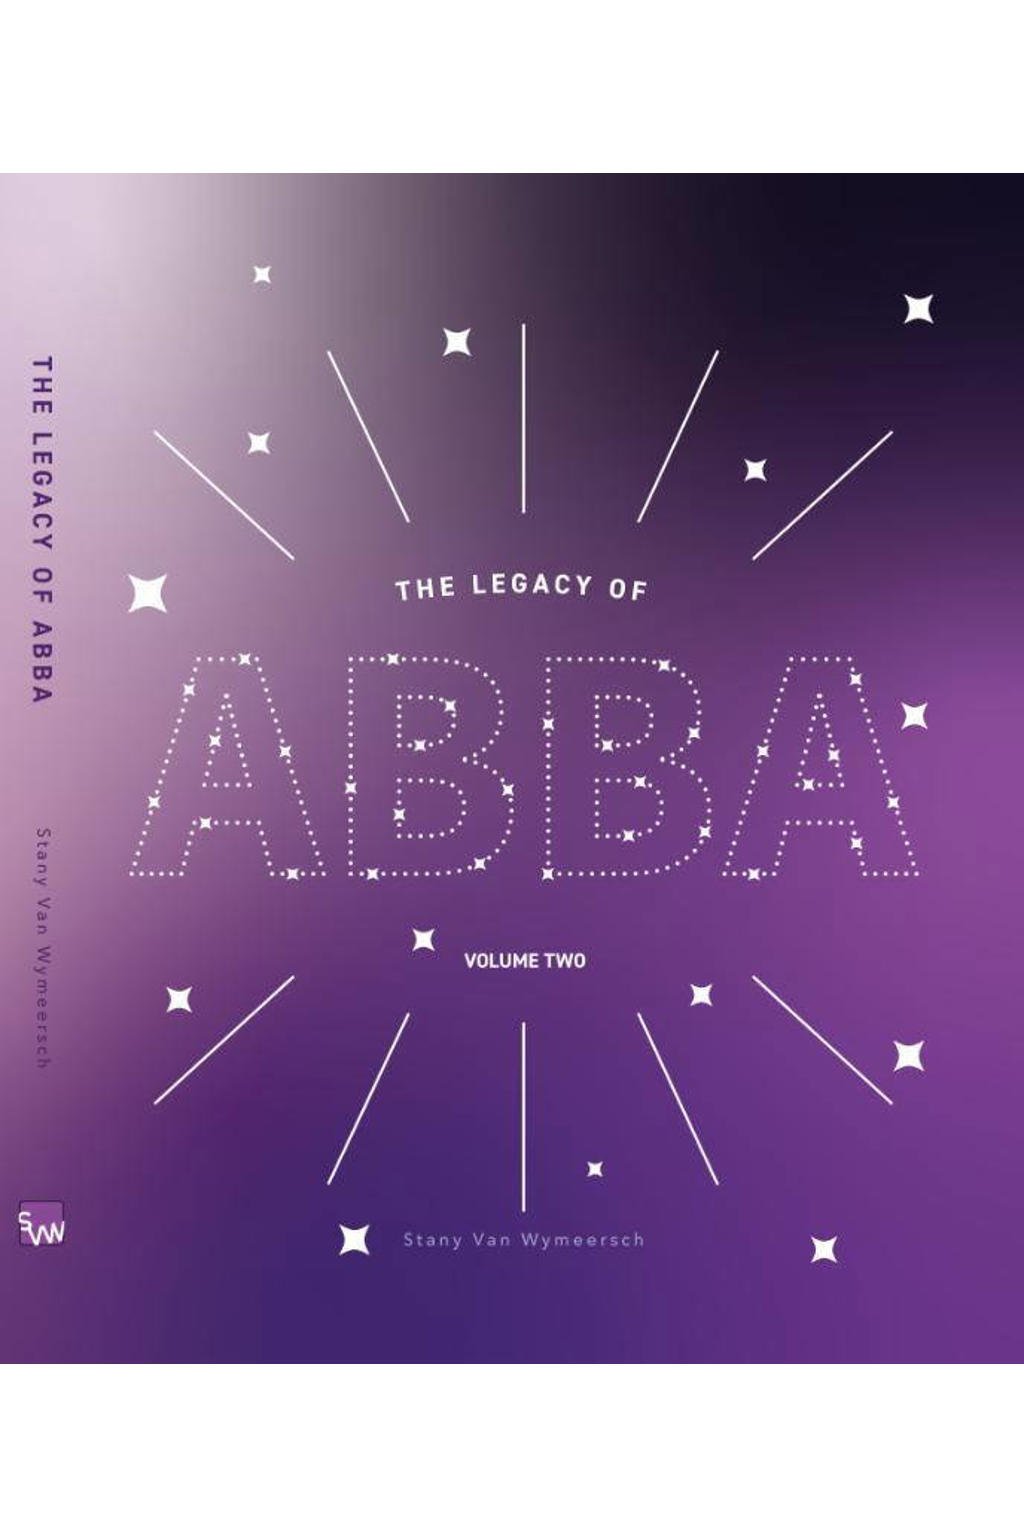 The Legacy of ABBA: The Legacy of ABBA Volume two - Stany Van Wymeersch